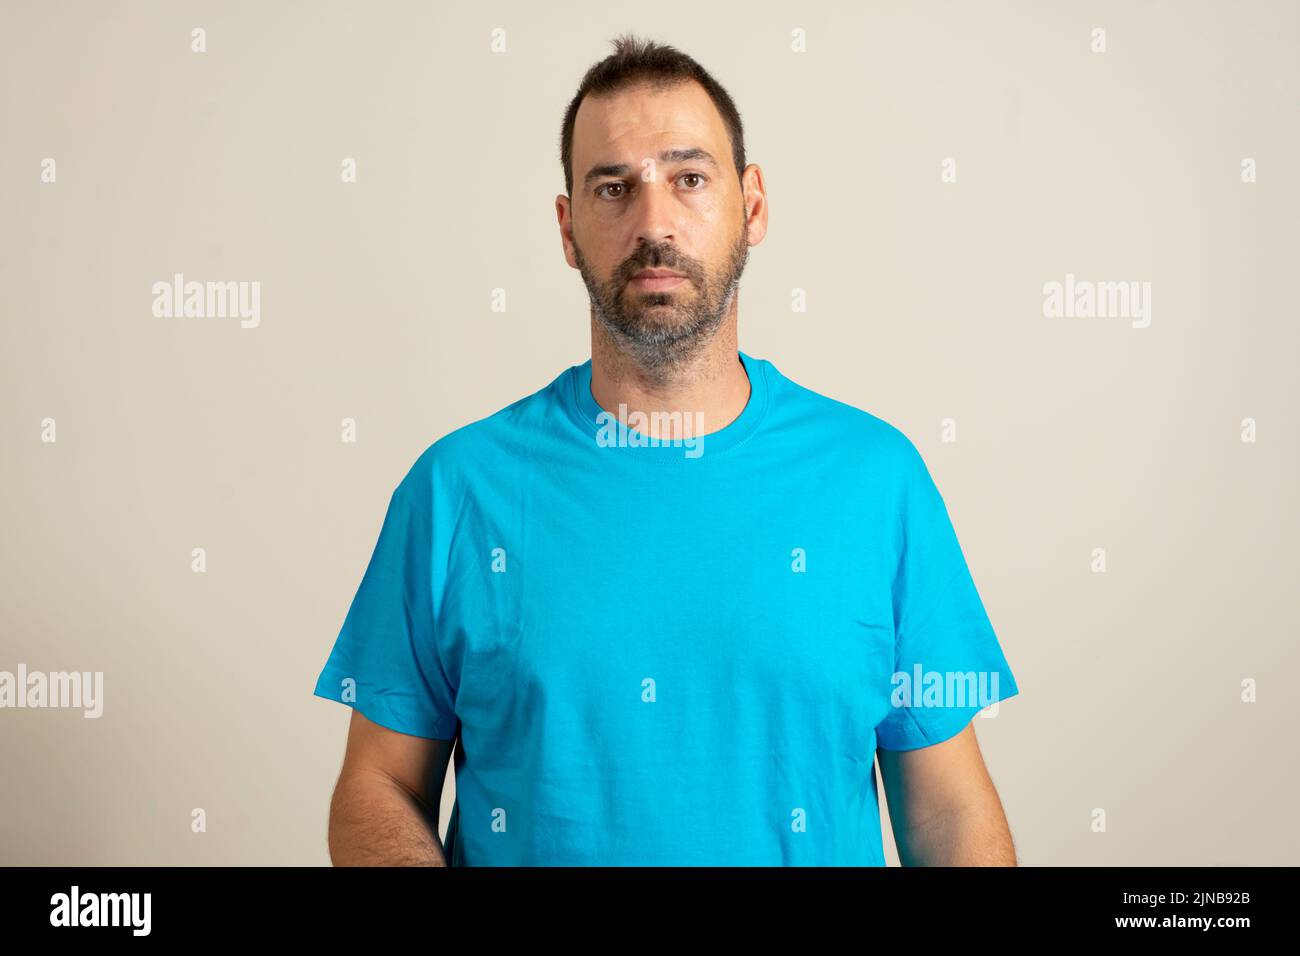 Isolated photo of handsome man with fashionable beard, mustache and hairstyle, wears casual blue t-shirt, poses in studio on beige background. Stock Photo